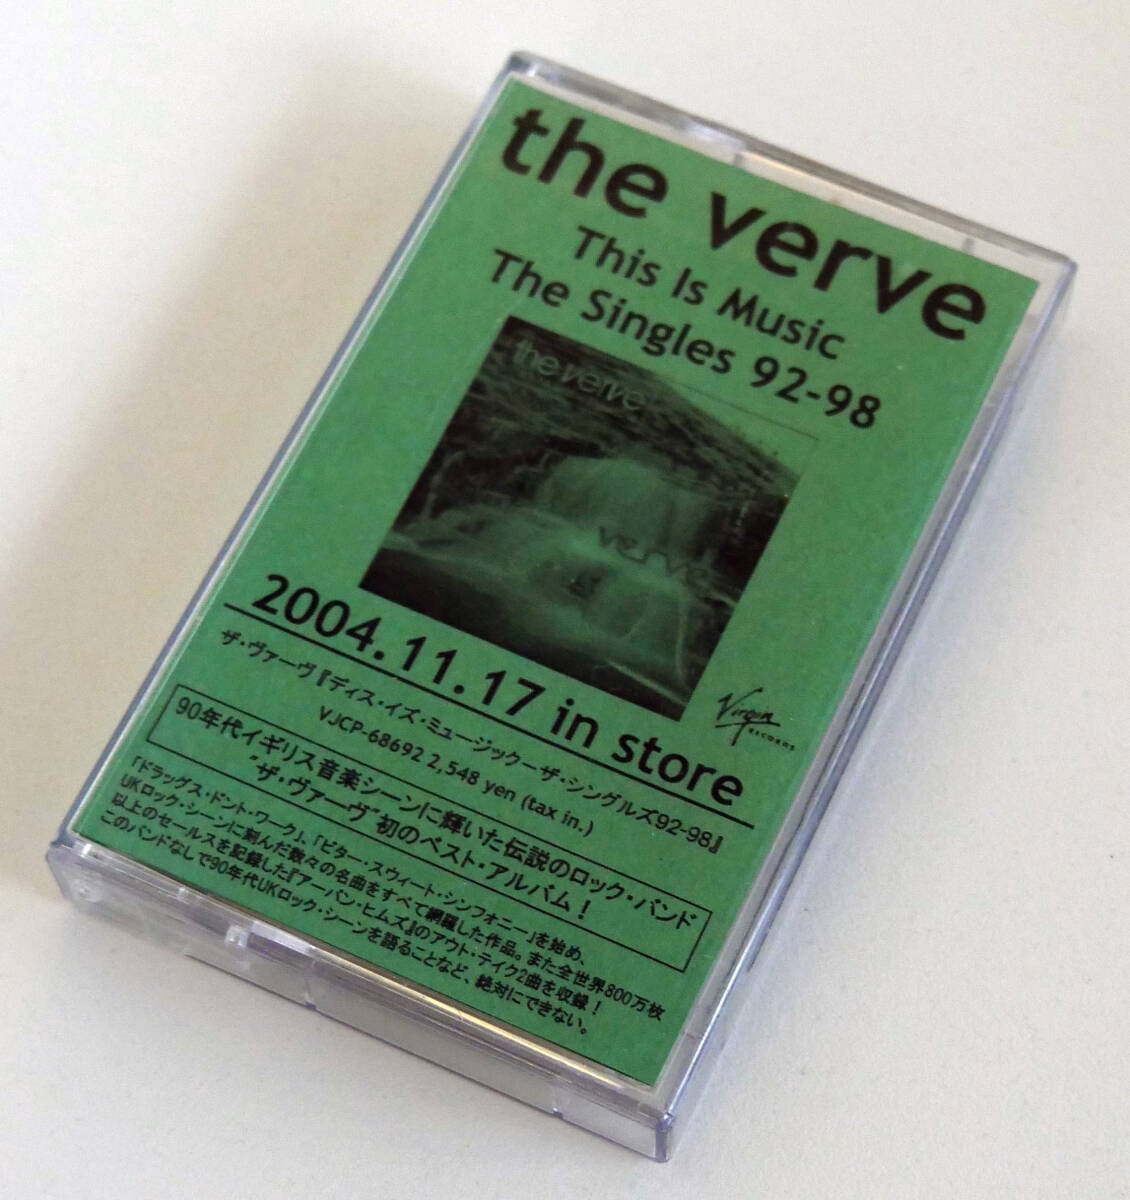 The Verve This Is Music The Singles 92-98 サンプルカセット Sample Cassette Tape の画像1